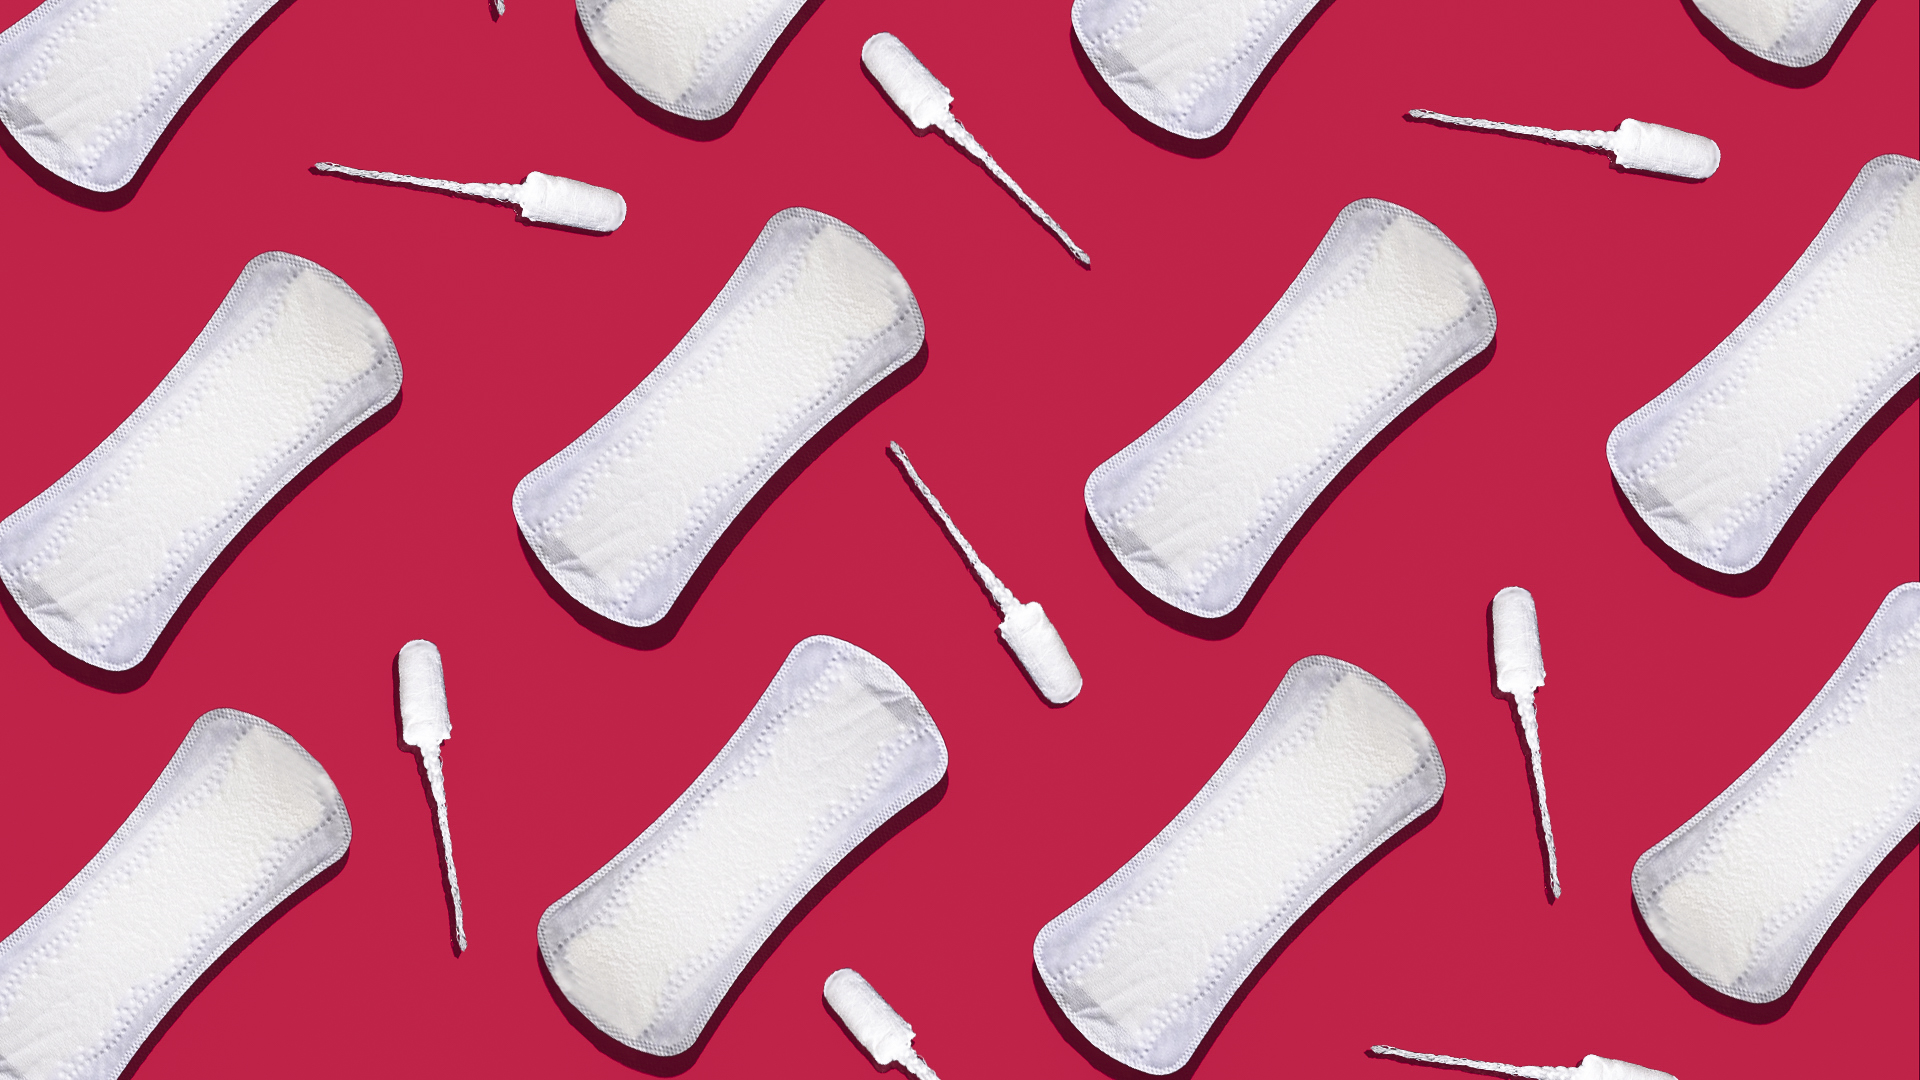 This is a photo of pads and tampons on a pink background. The pads and tampons are laid out in a repeating pattern.